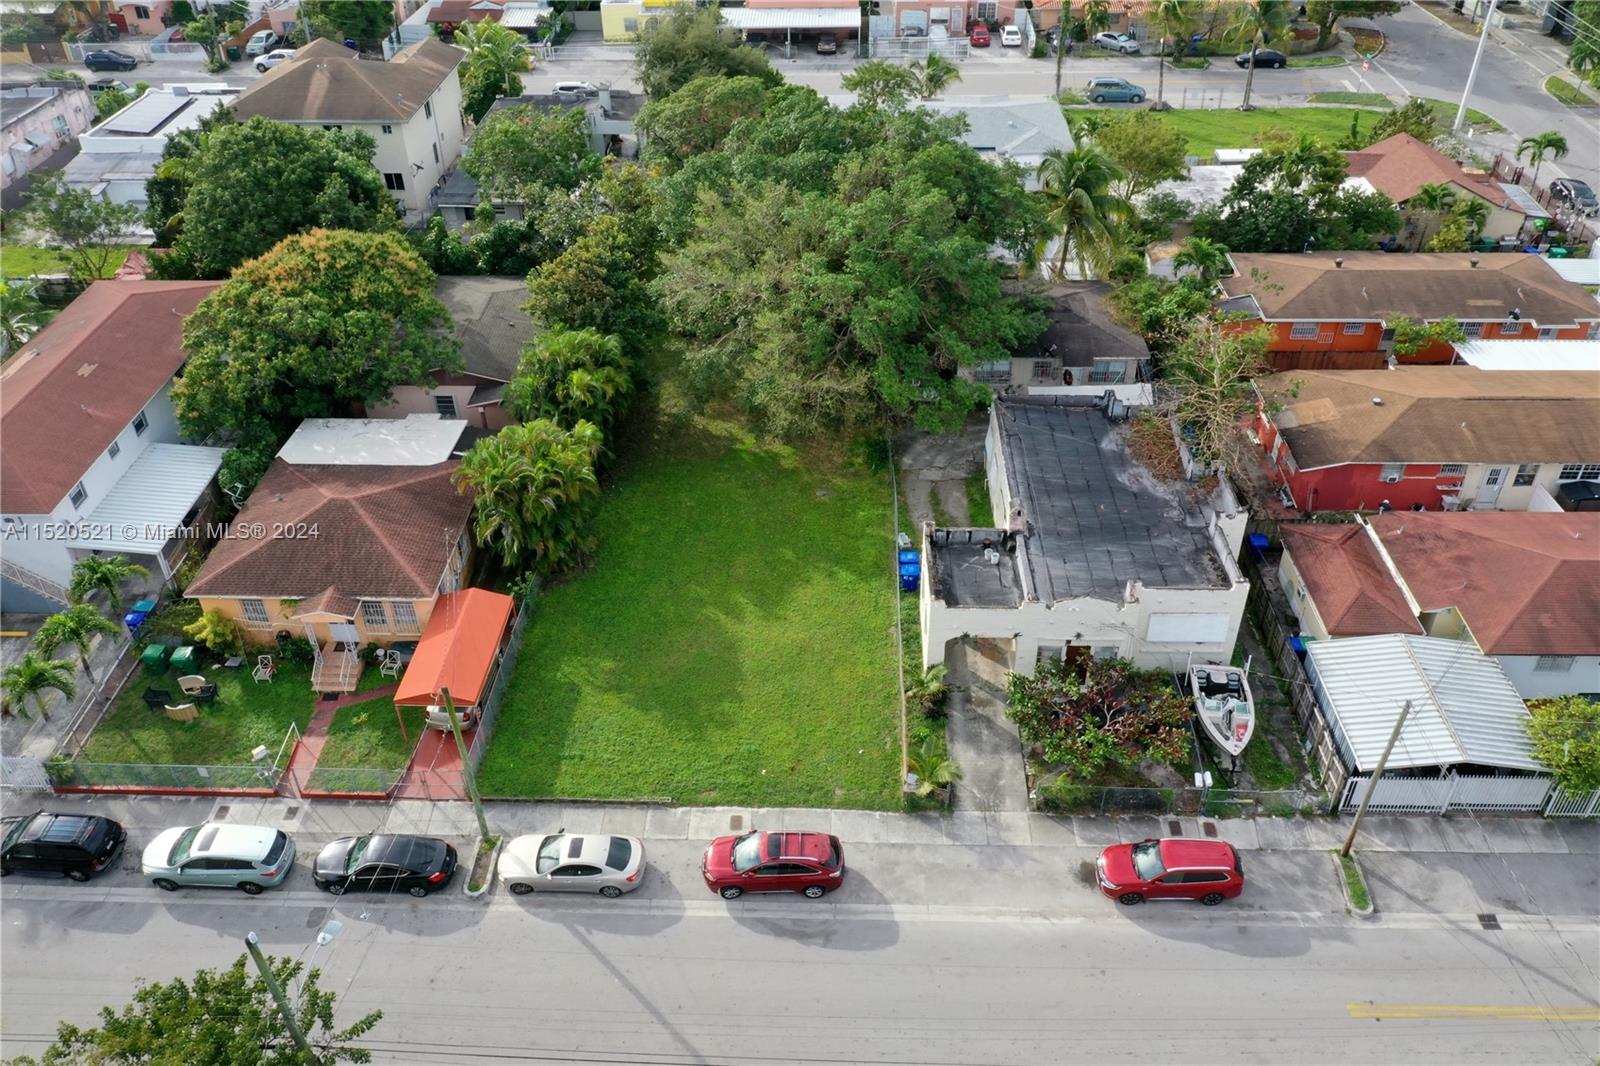 an aerial view of a house with a parking lot